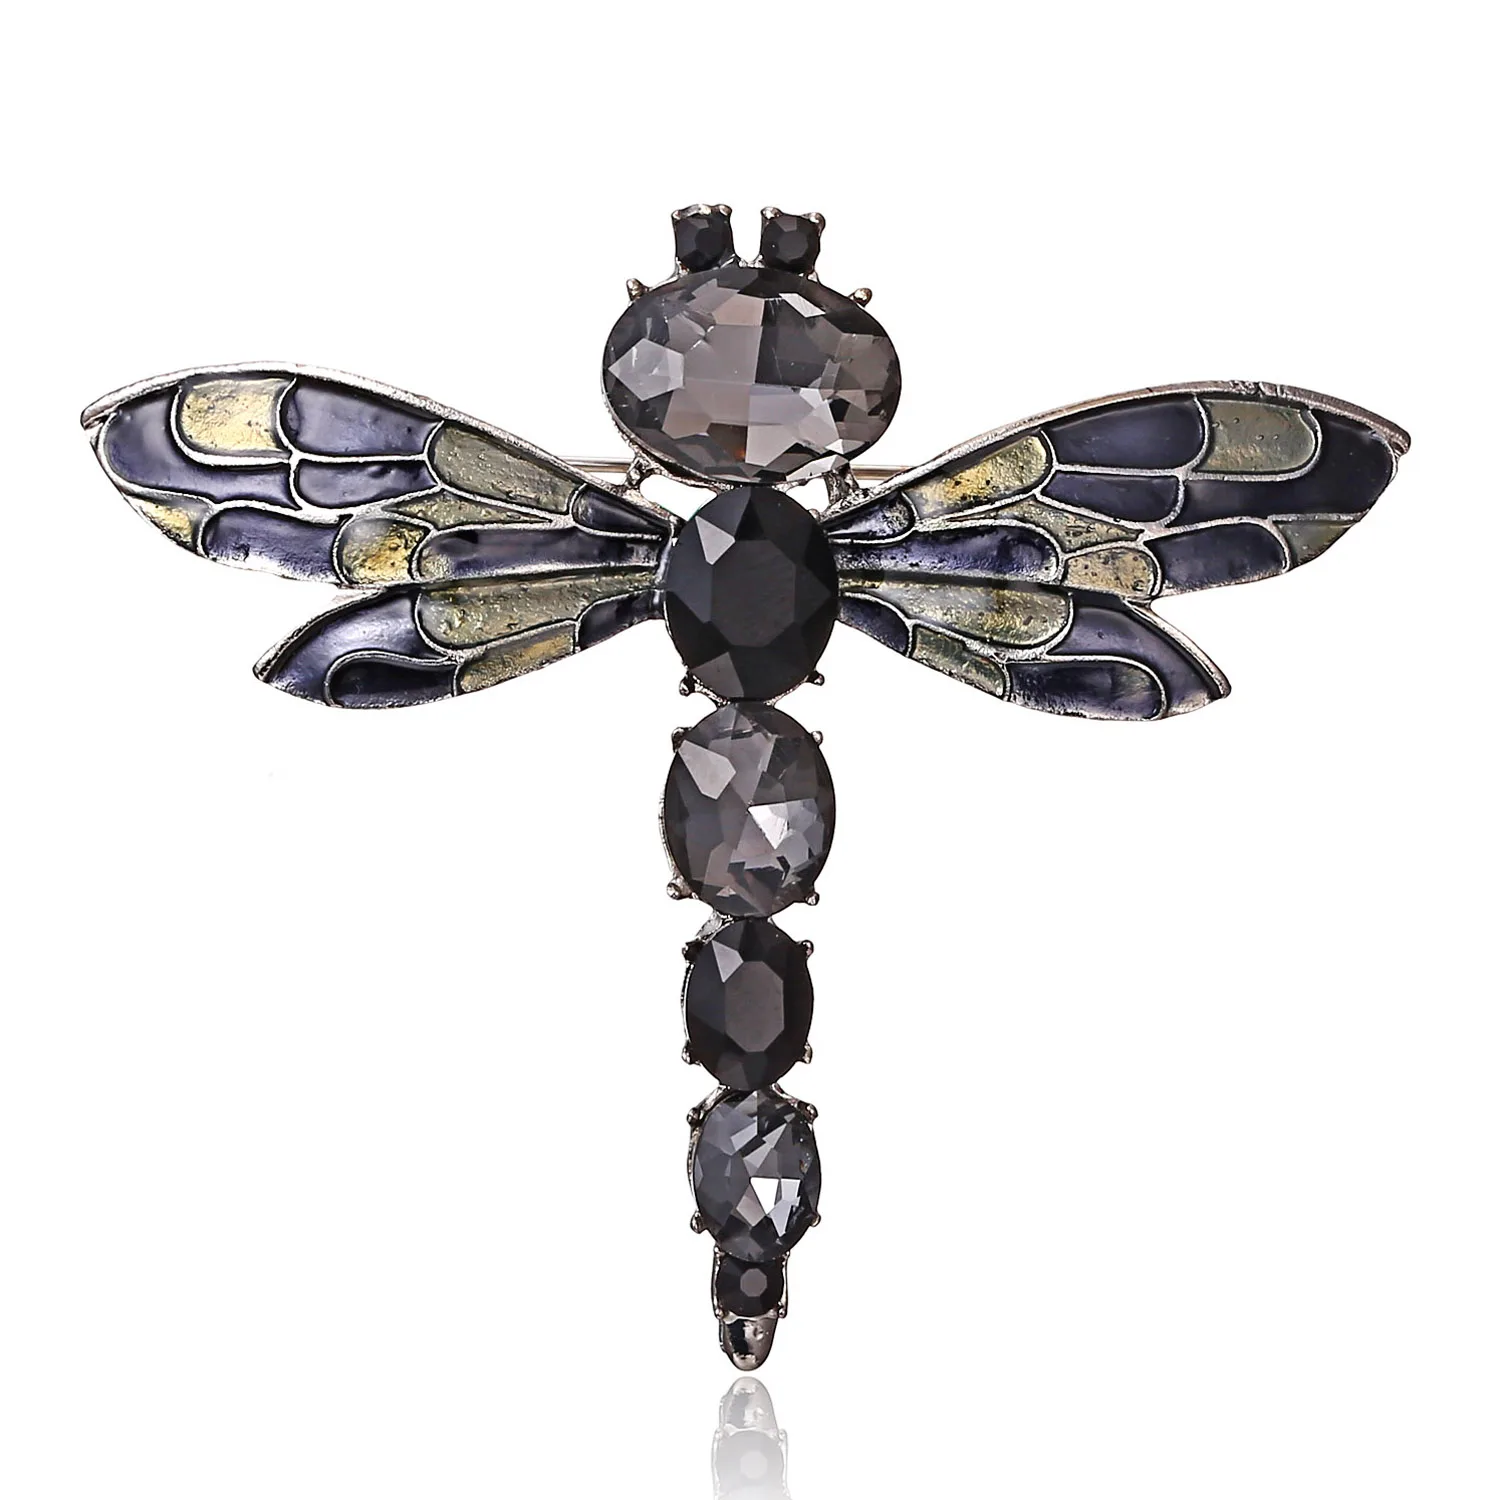 

Insect dragonfly animal crystal glass brooch pin rhinestone design couple brooches luxury for couple women lady girls gift, As shown in picture